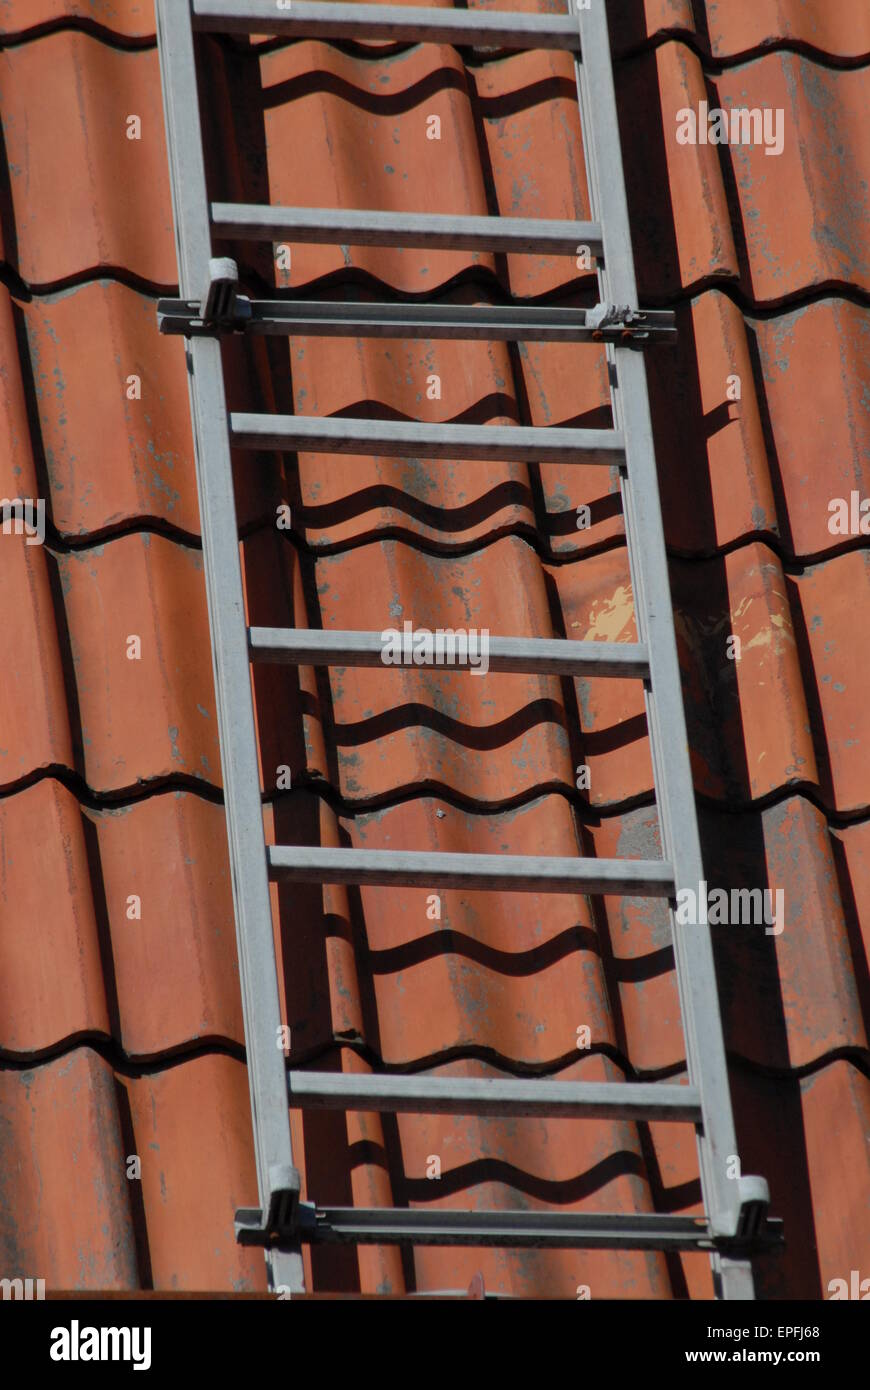 Rooftop ladder. Stock Photo